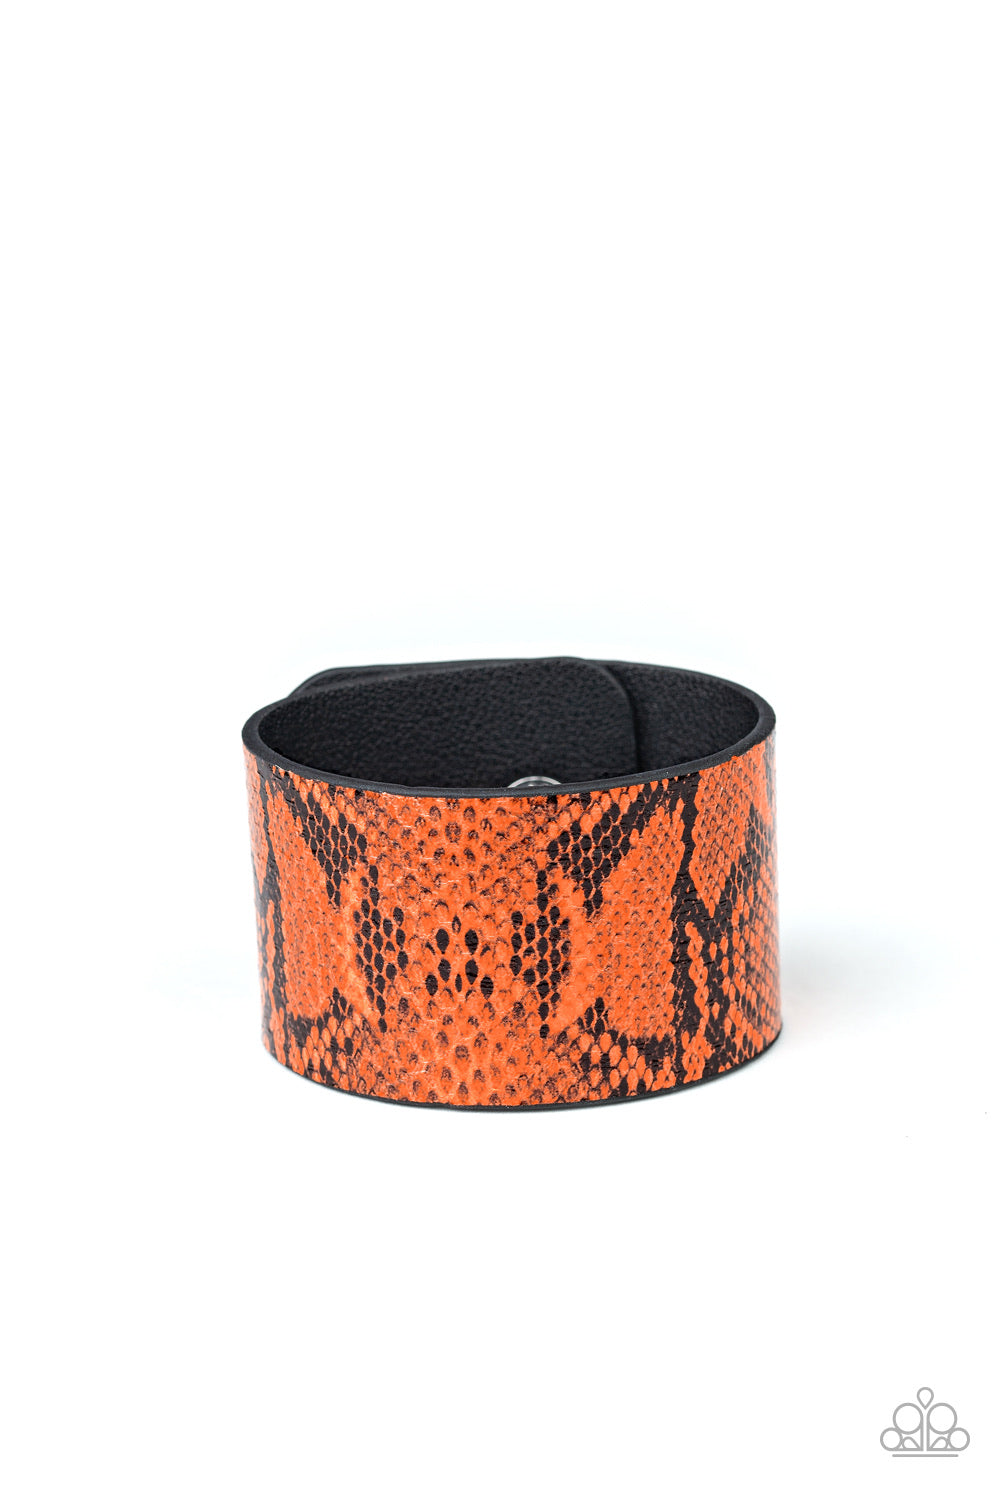 It’s a Jungle Out There -Orange - Classy Elite Jewelry